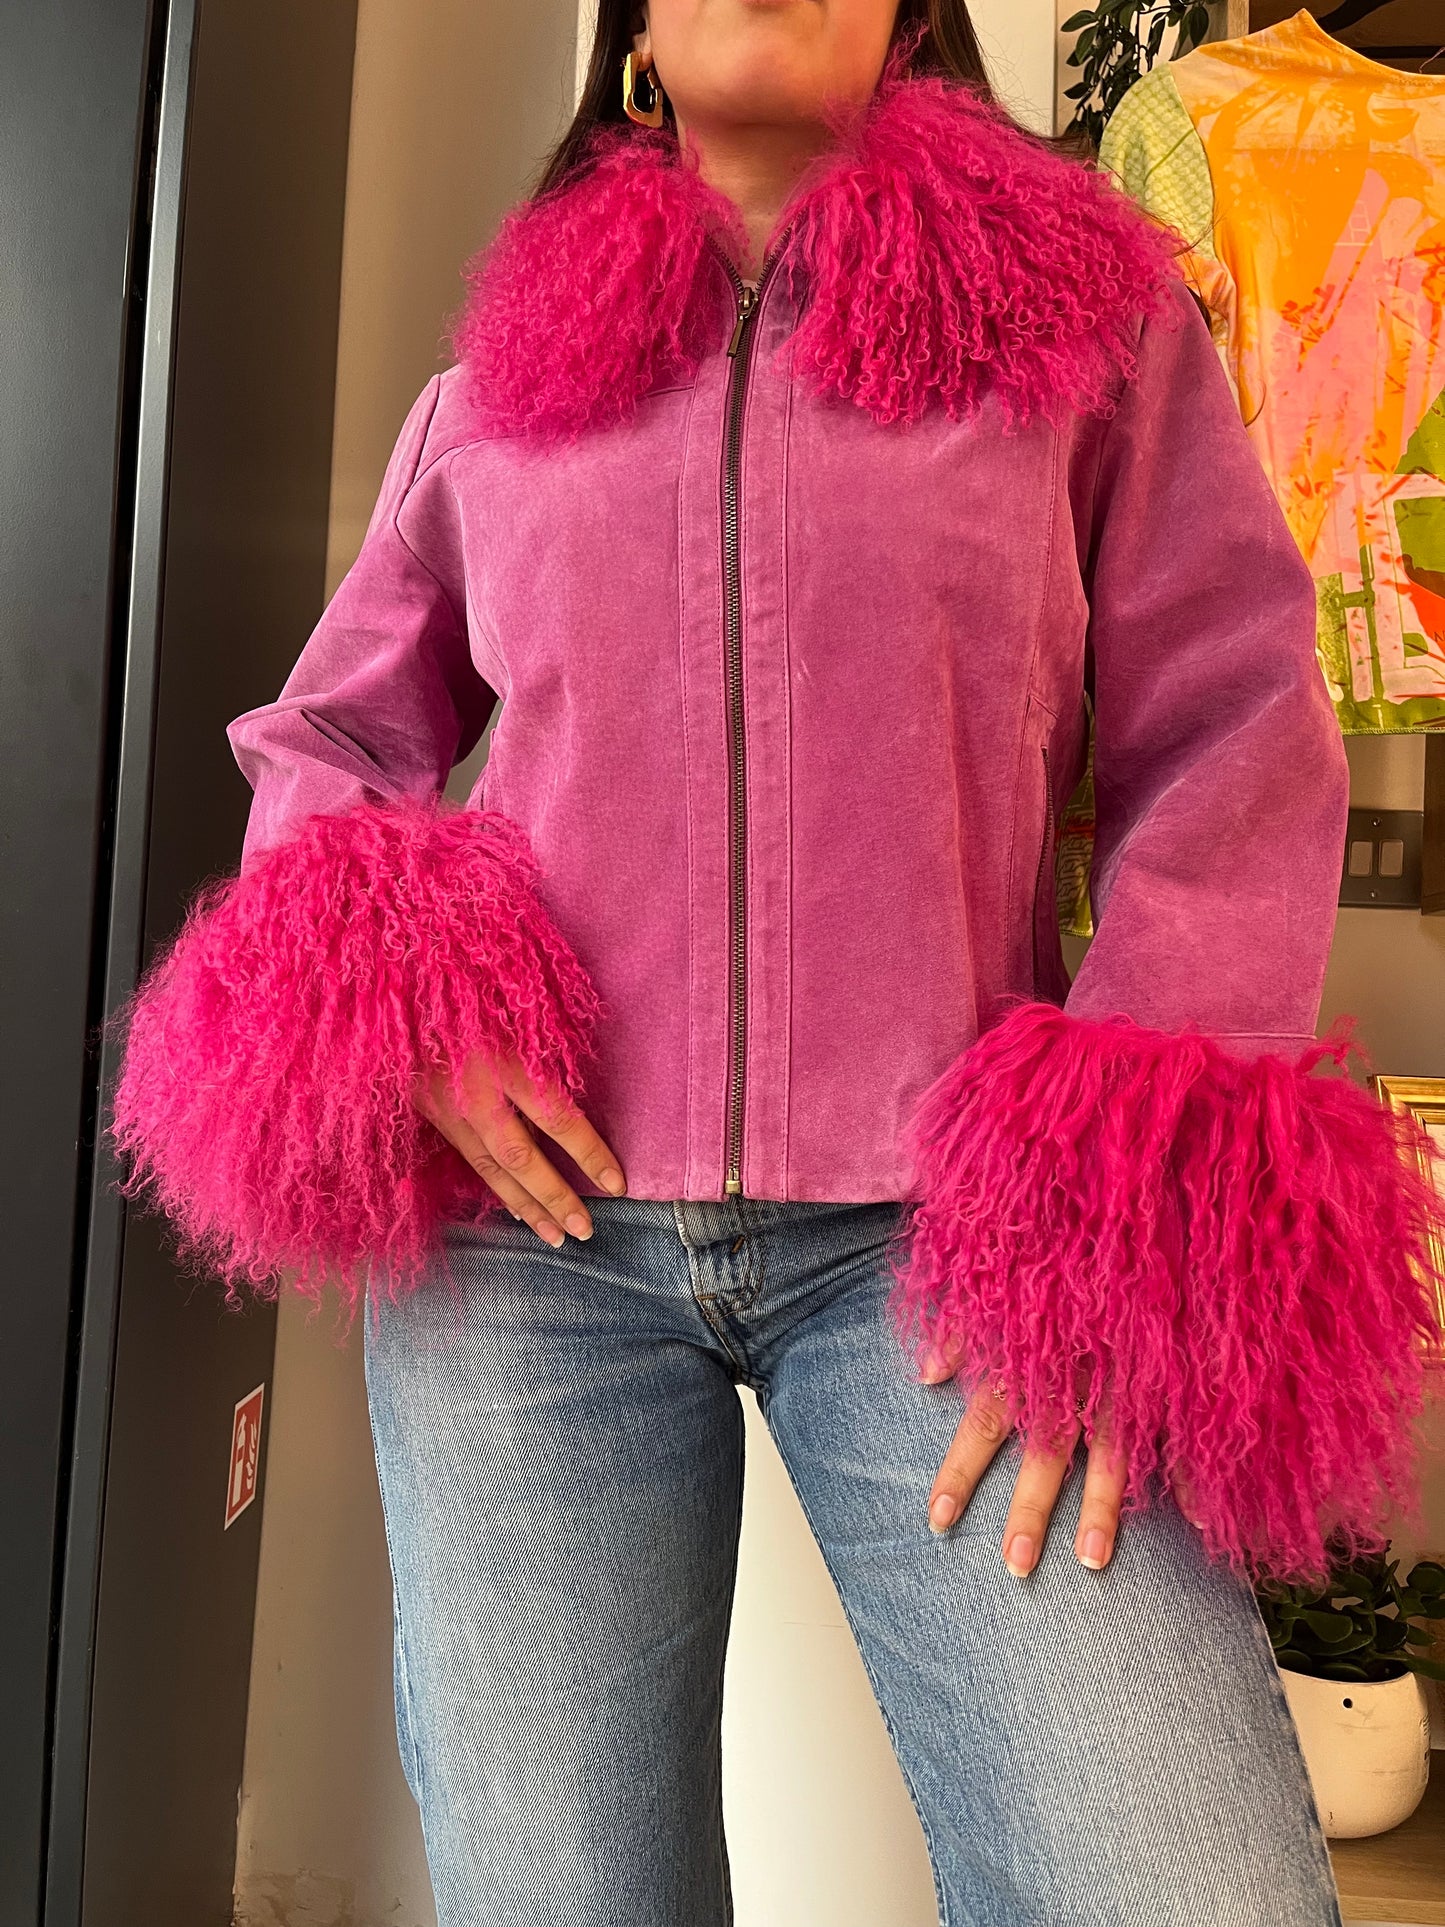 Purple and pink suede jacket